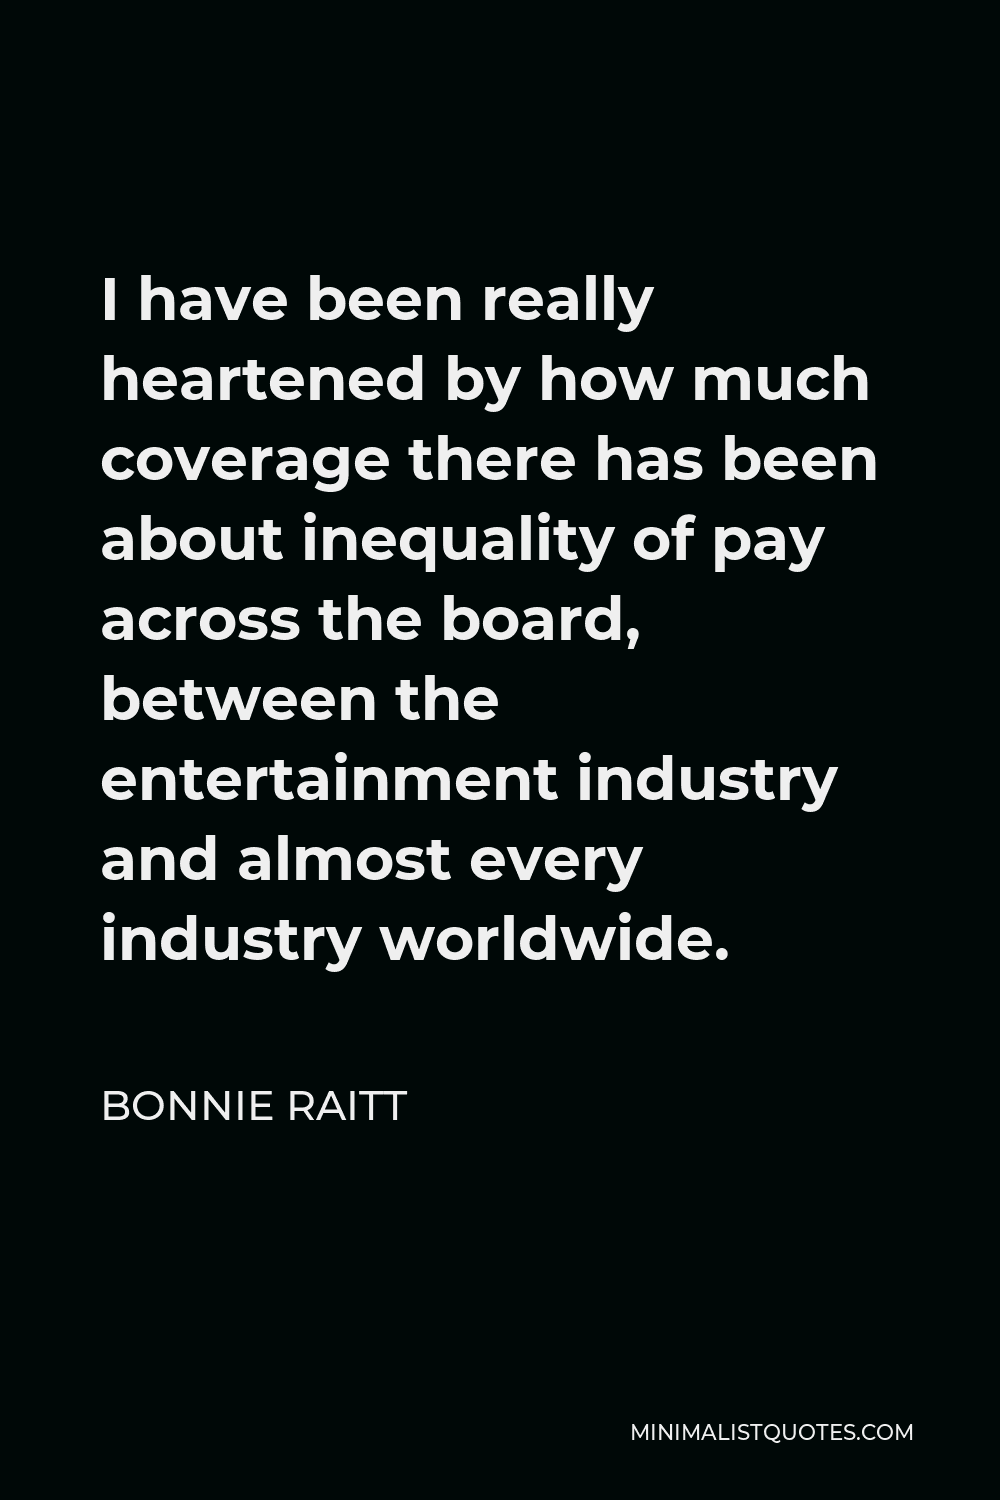 Bonnie Raitt Quote - I have been really heartened by how much coverage there has been about inequality of pay across the board, between the entertainment industry and almost every industry worldwide.